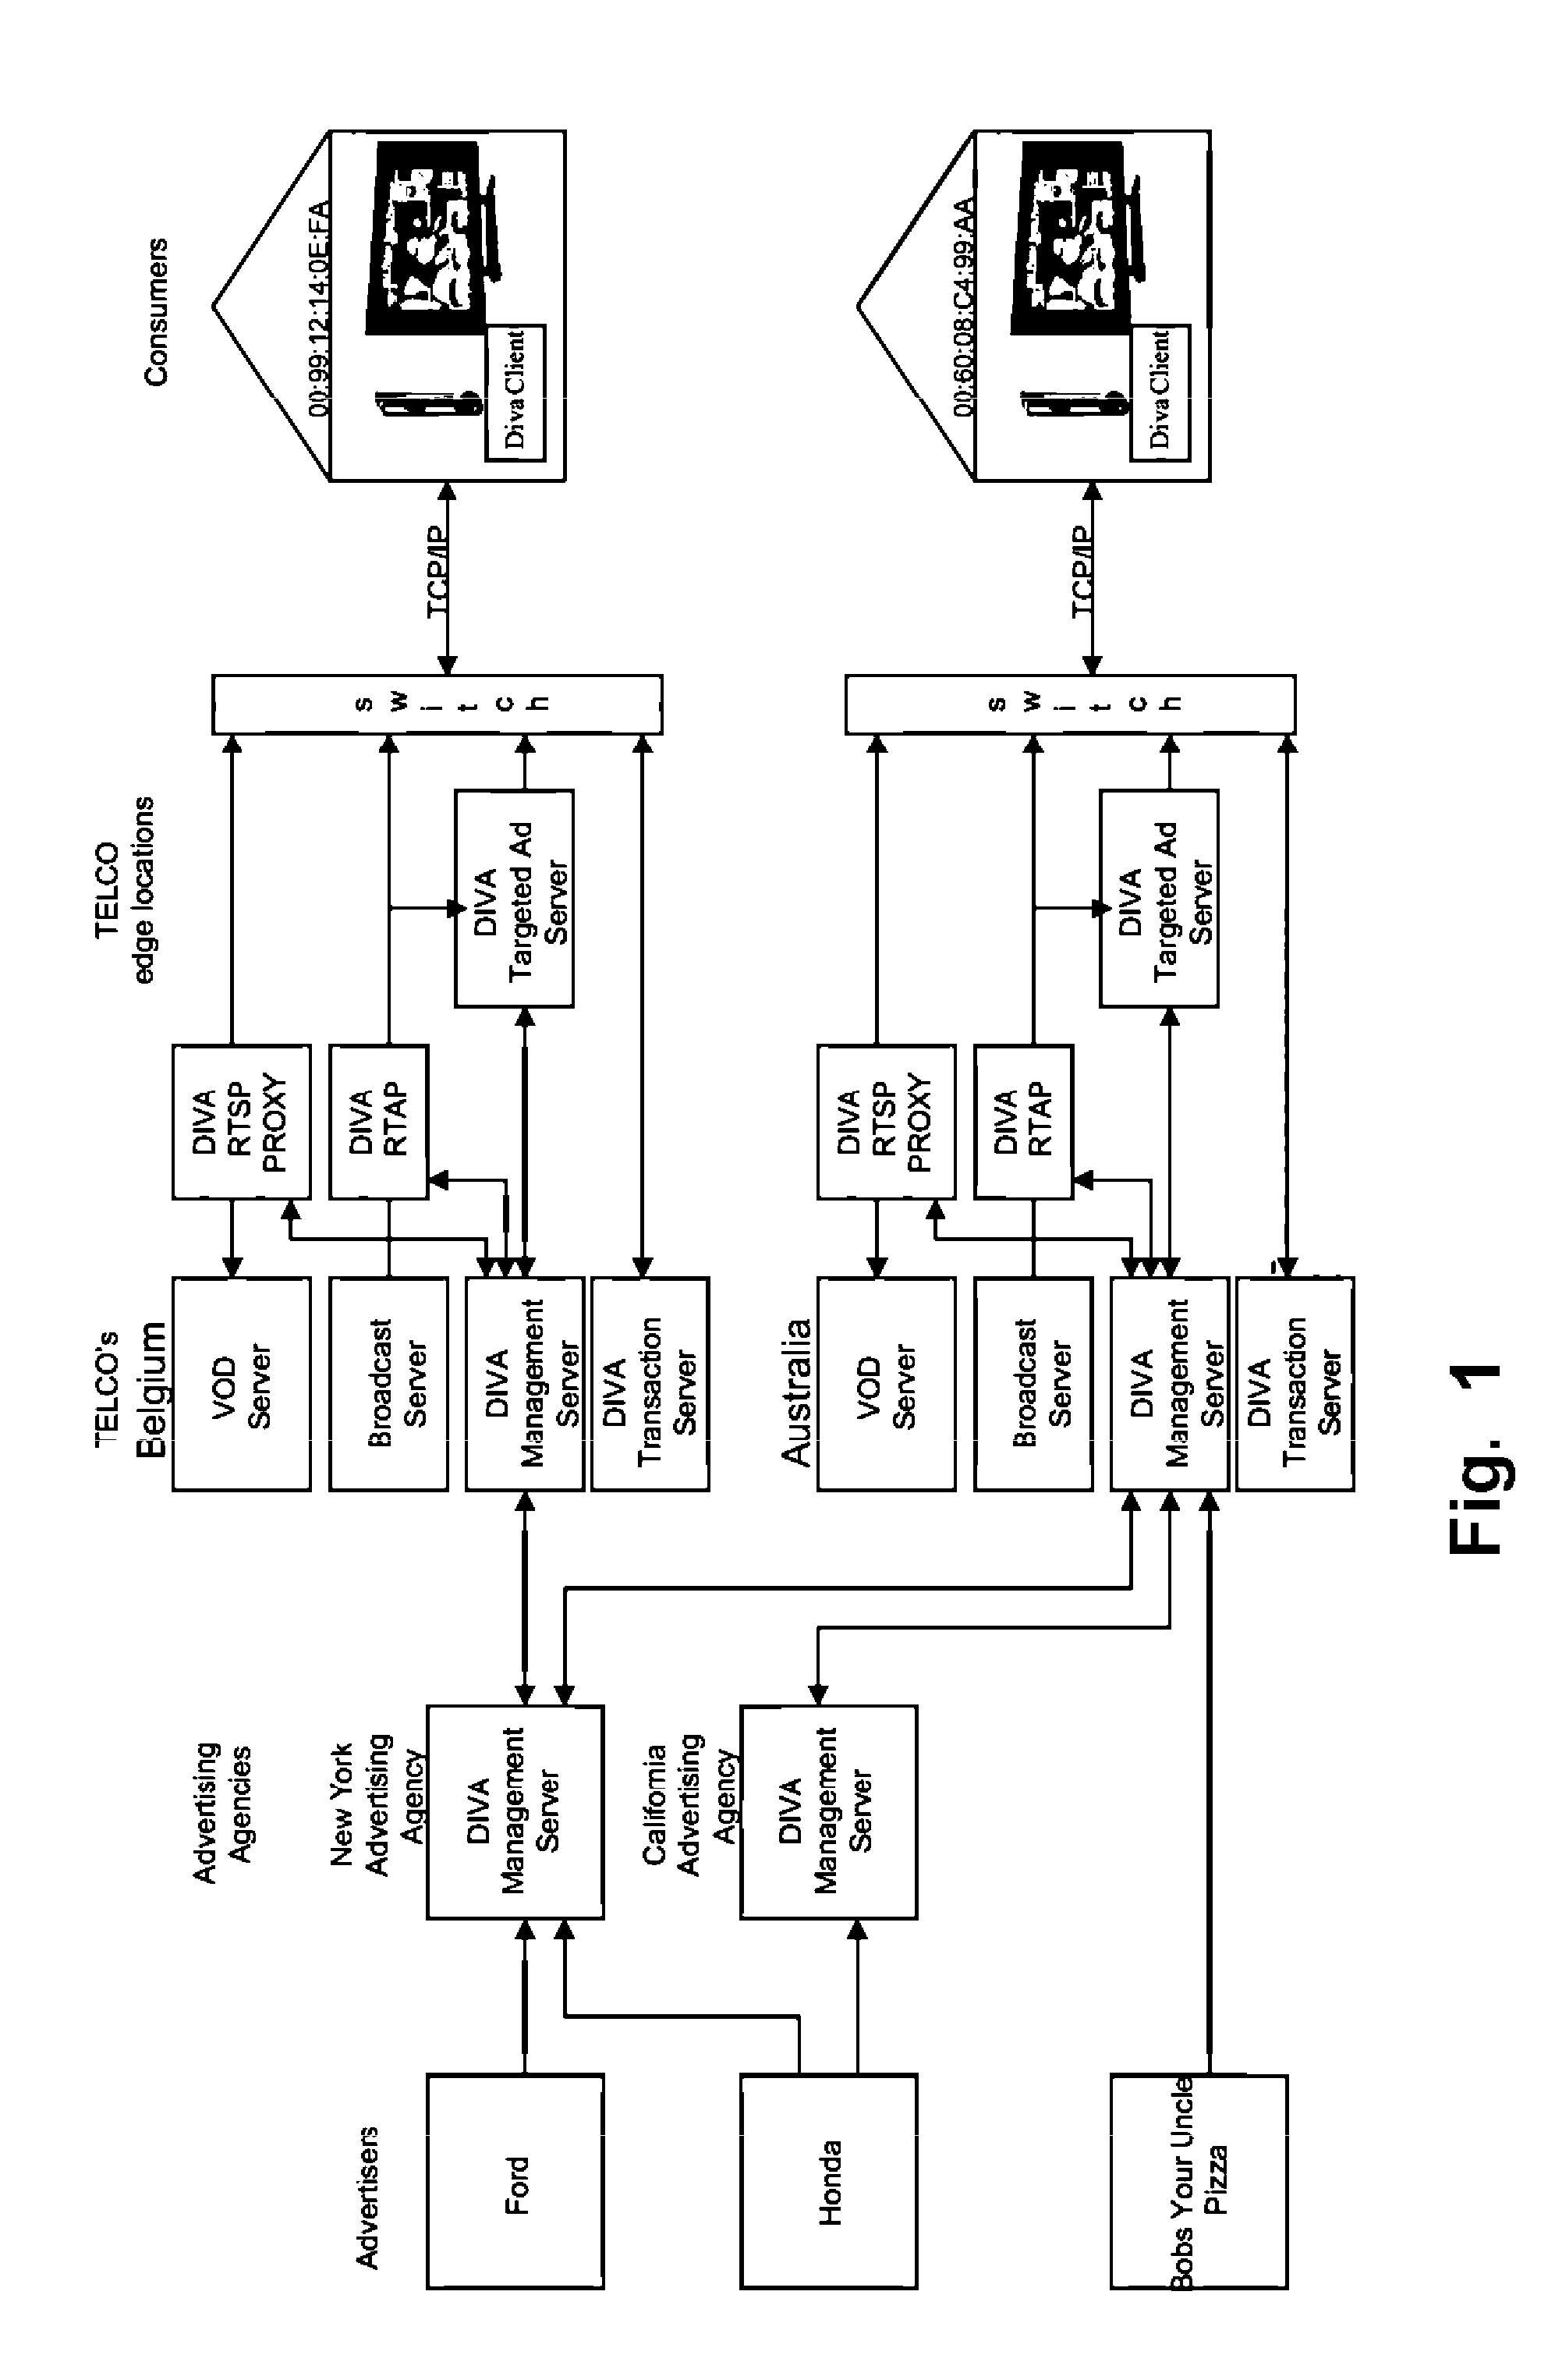 Multi-Channel Digital Targeted Video Advertising System and Method